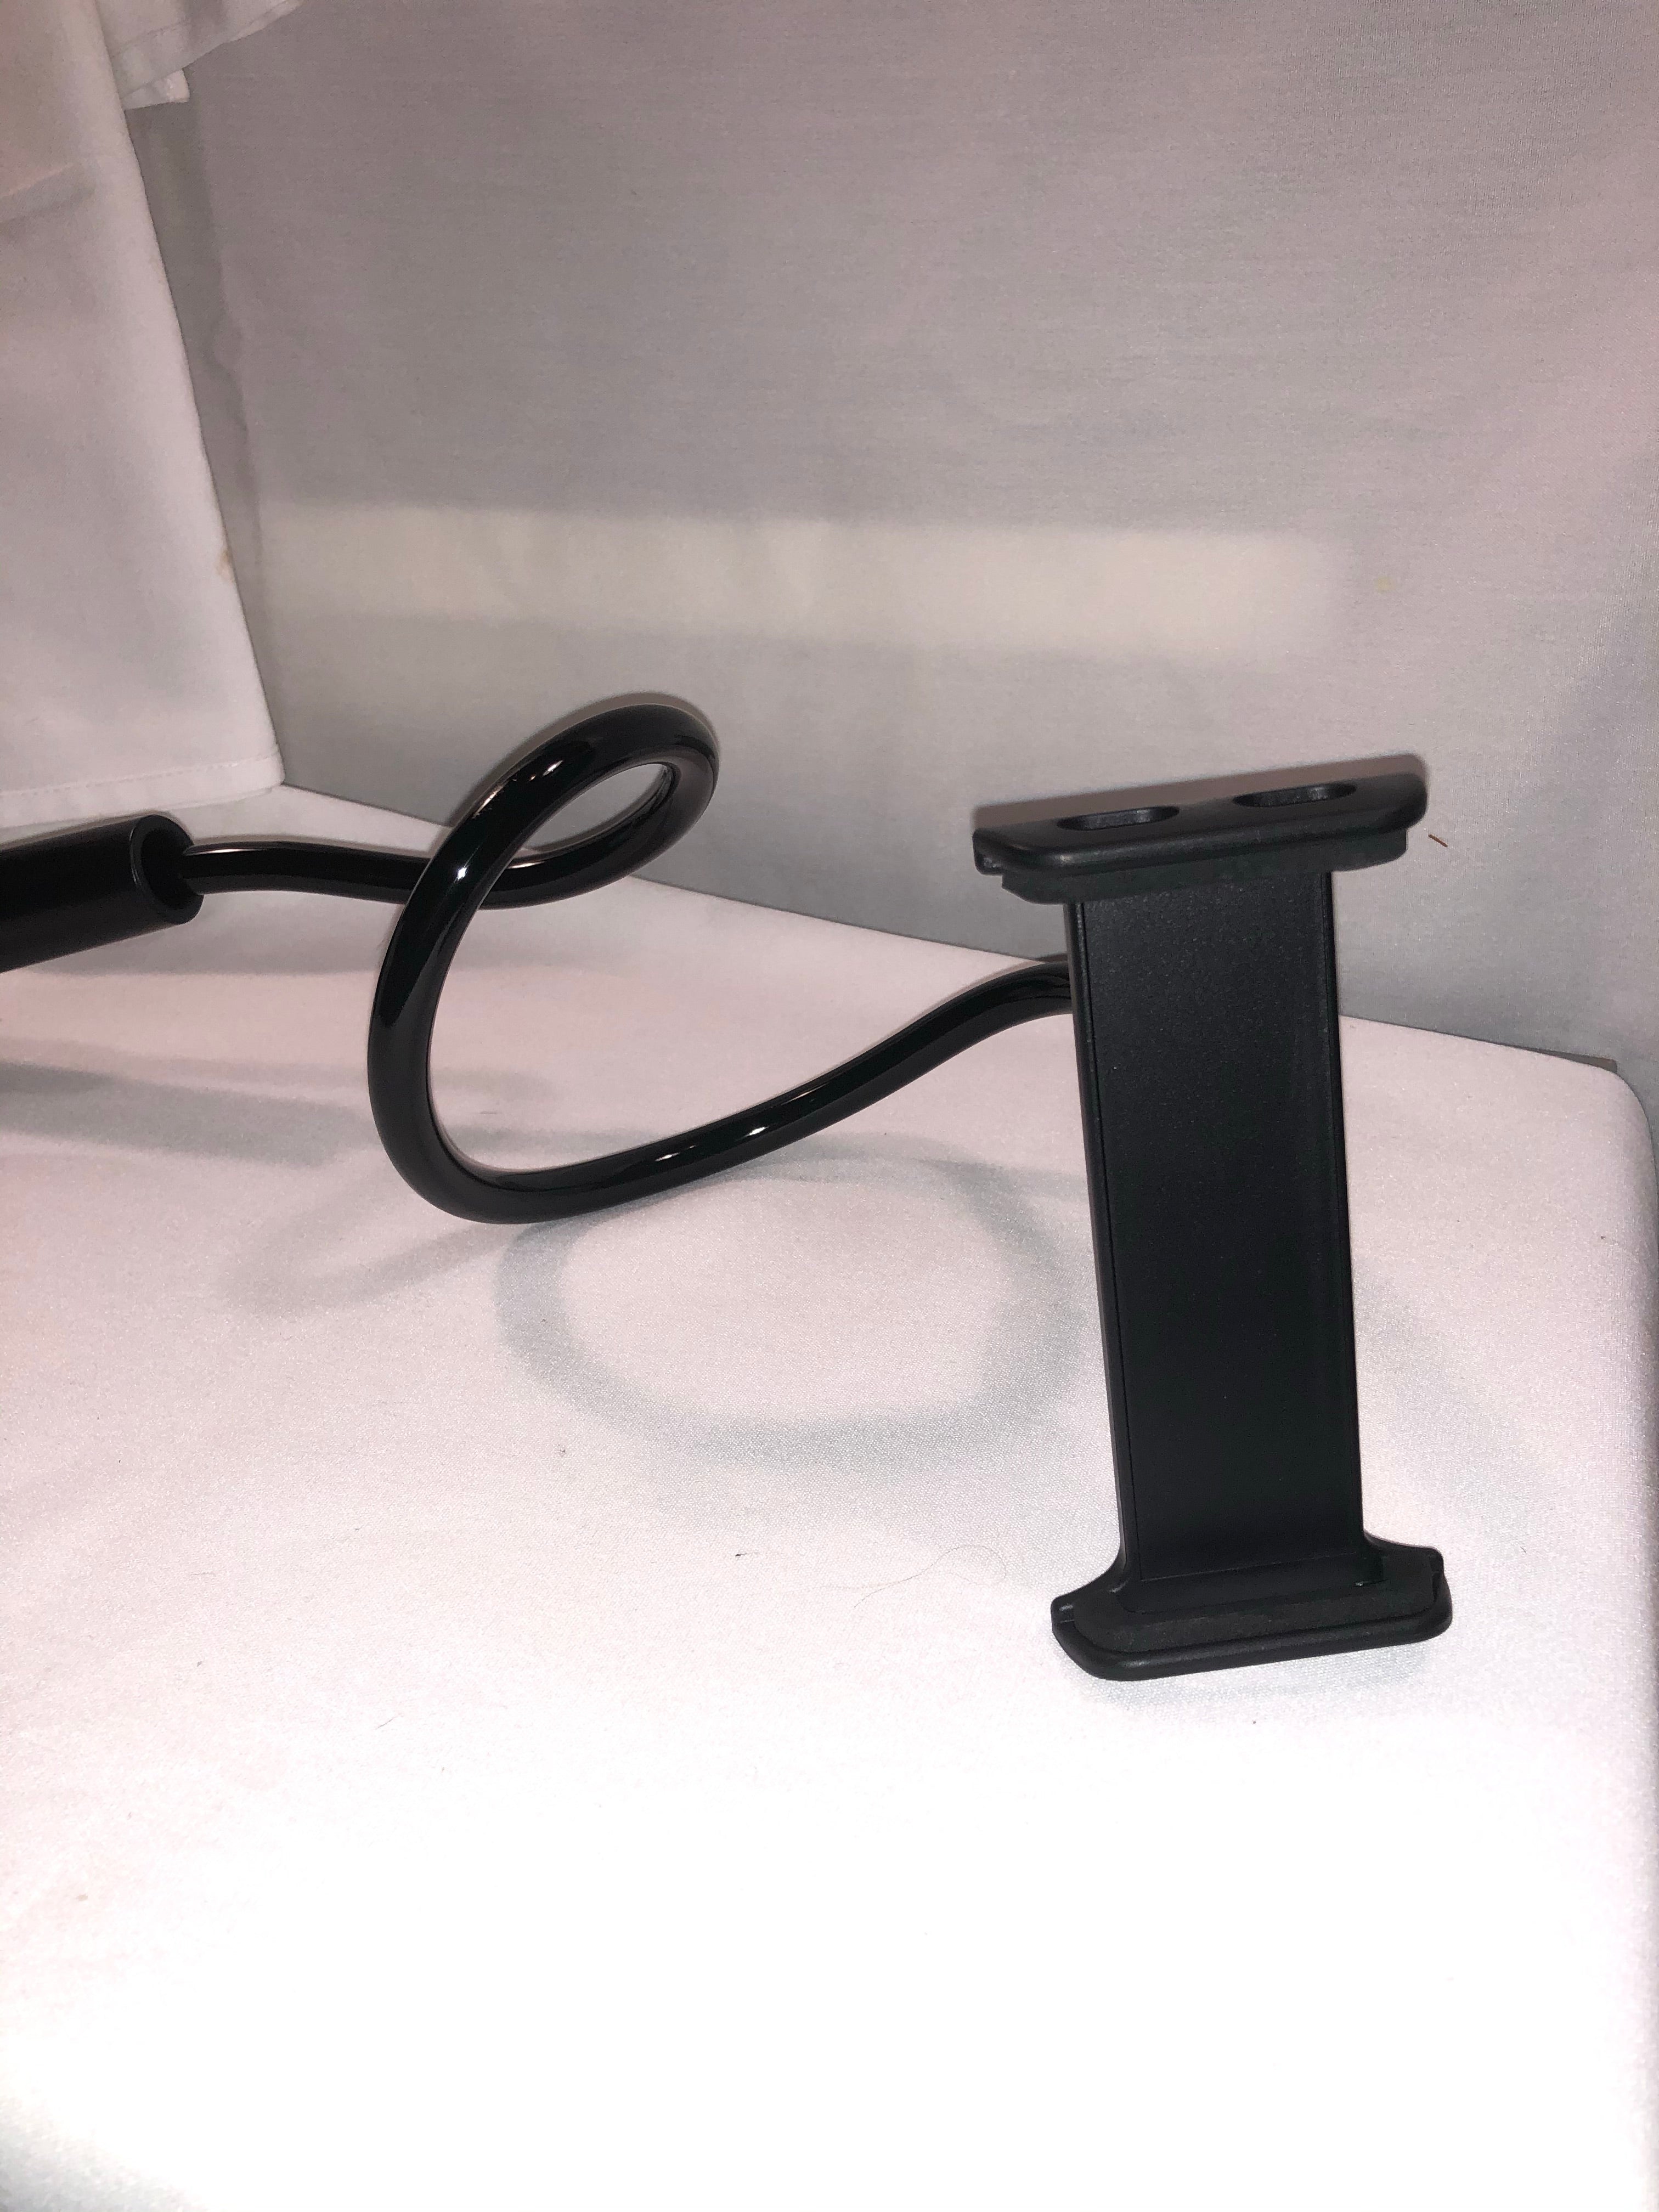 Cell phone holder with clamp